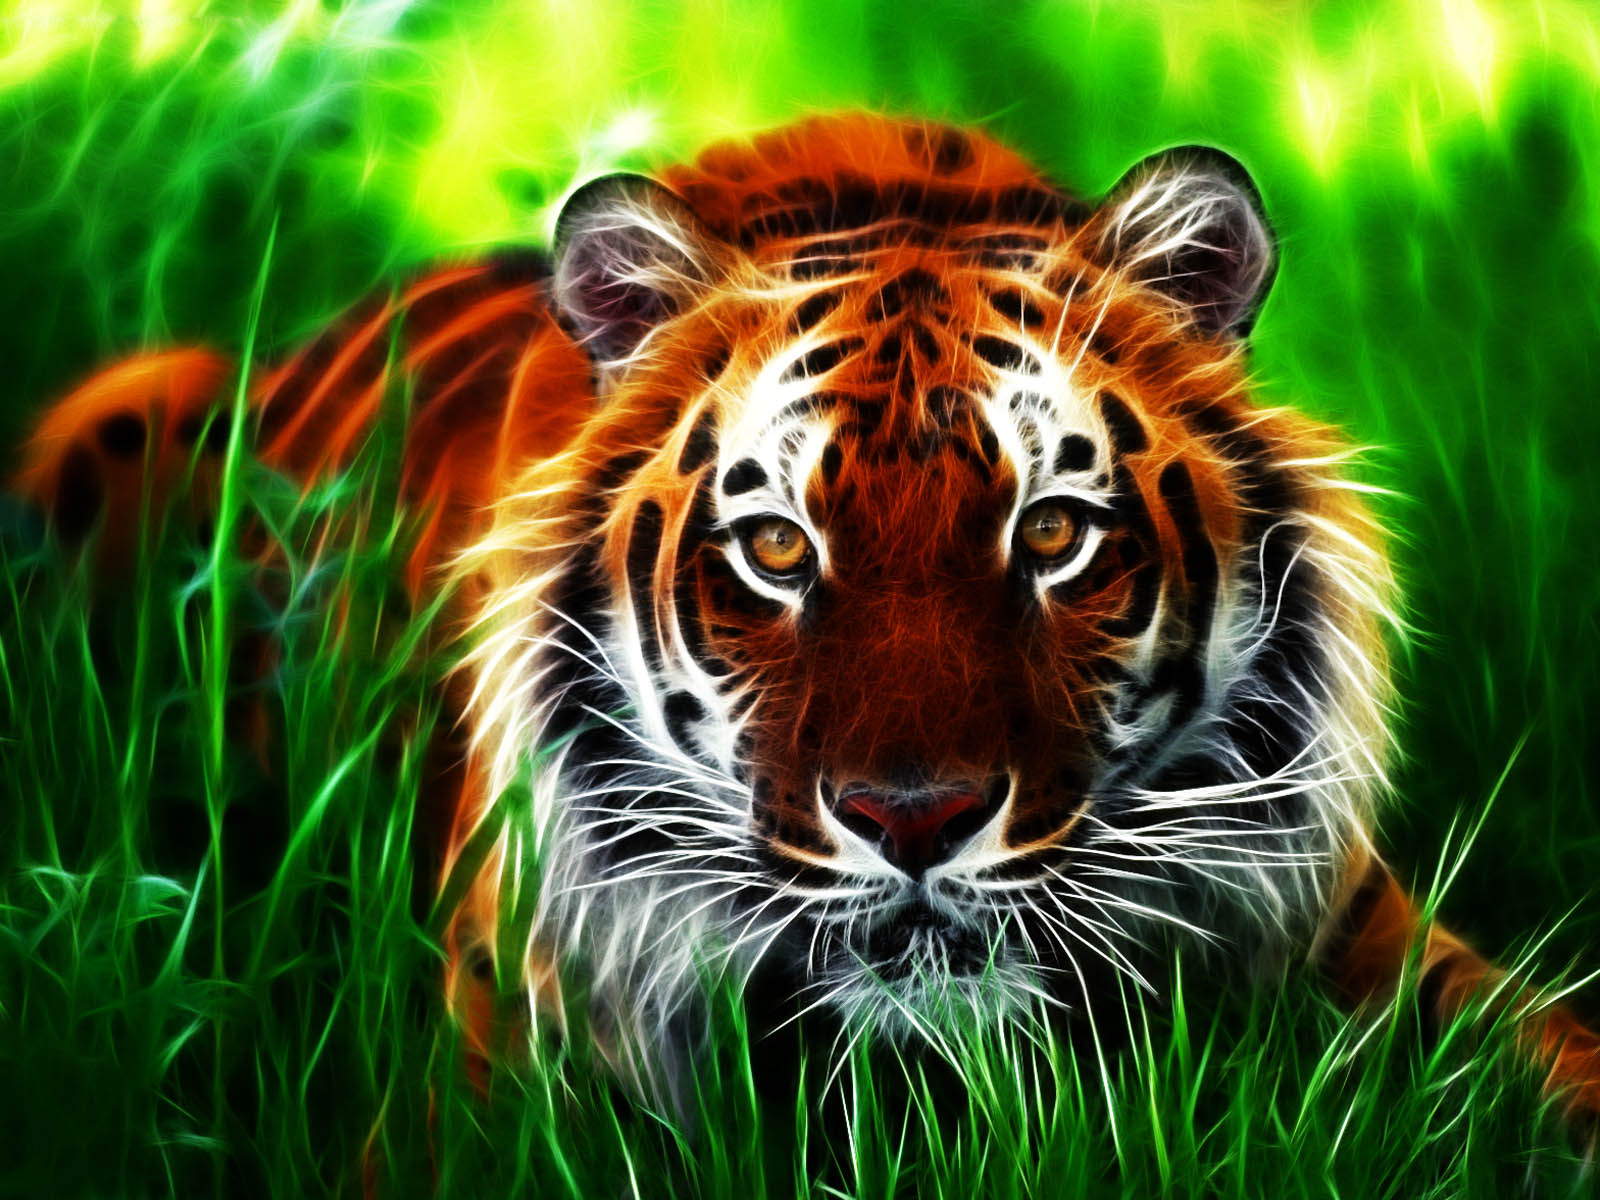 Tag Tiger 3D Wallpapers Images Photos Pictures and Backgrounds for